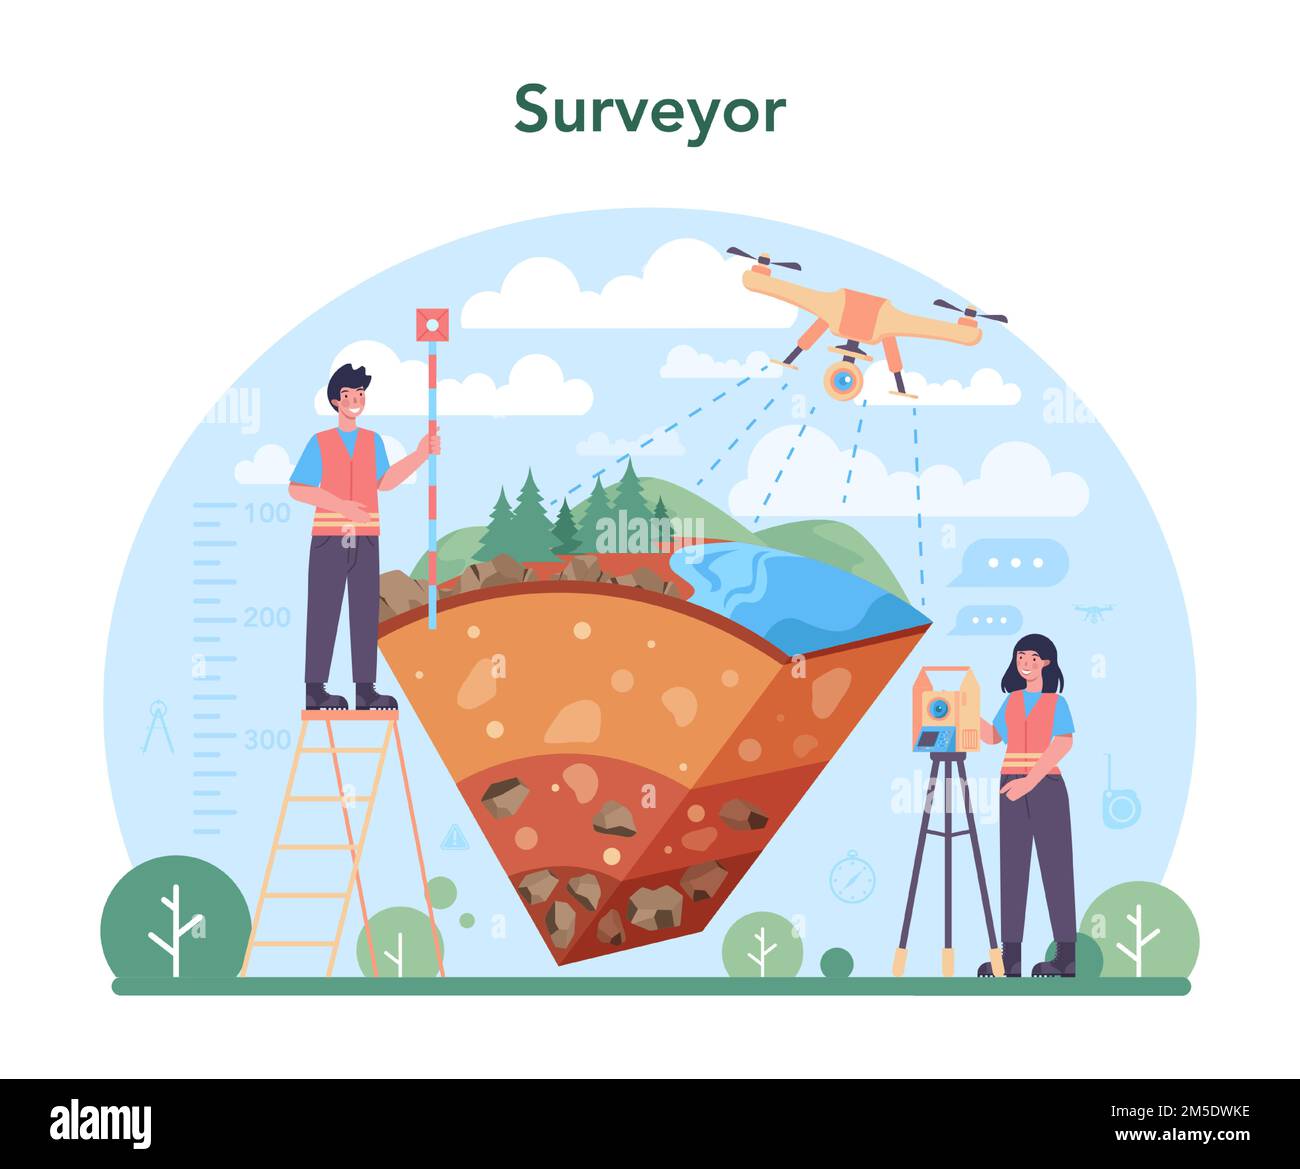 Surveyor concept. Land surveying technology, geodesy science. Engineering and topography equipment. People with compass, map and topographic equipment Stock Vector